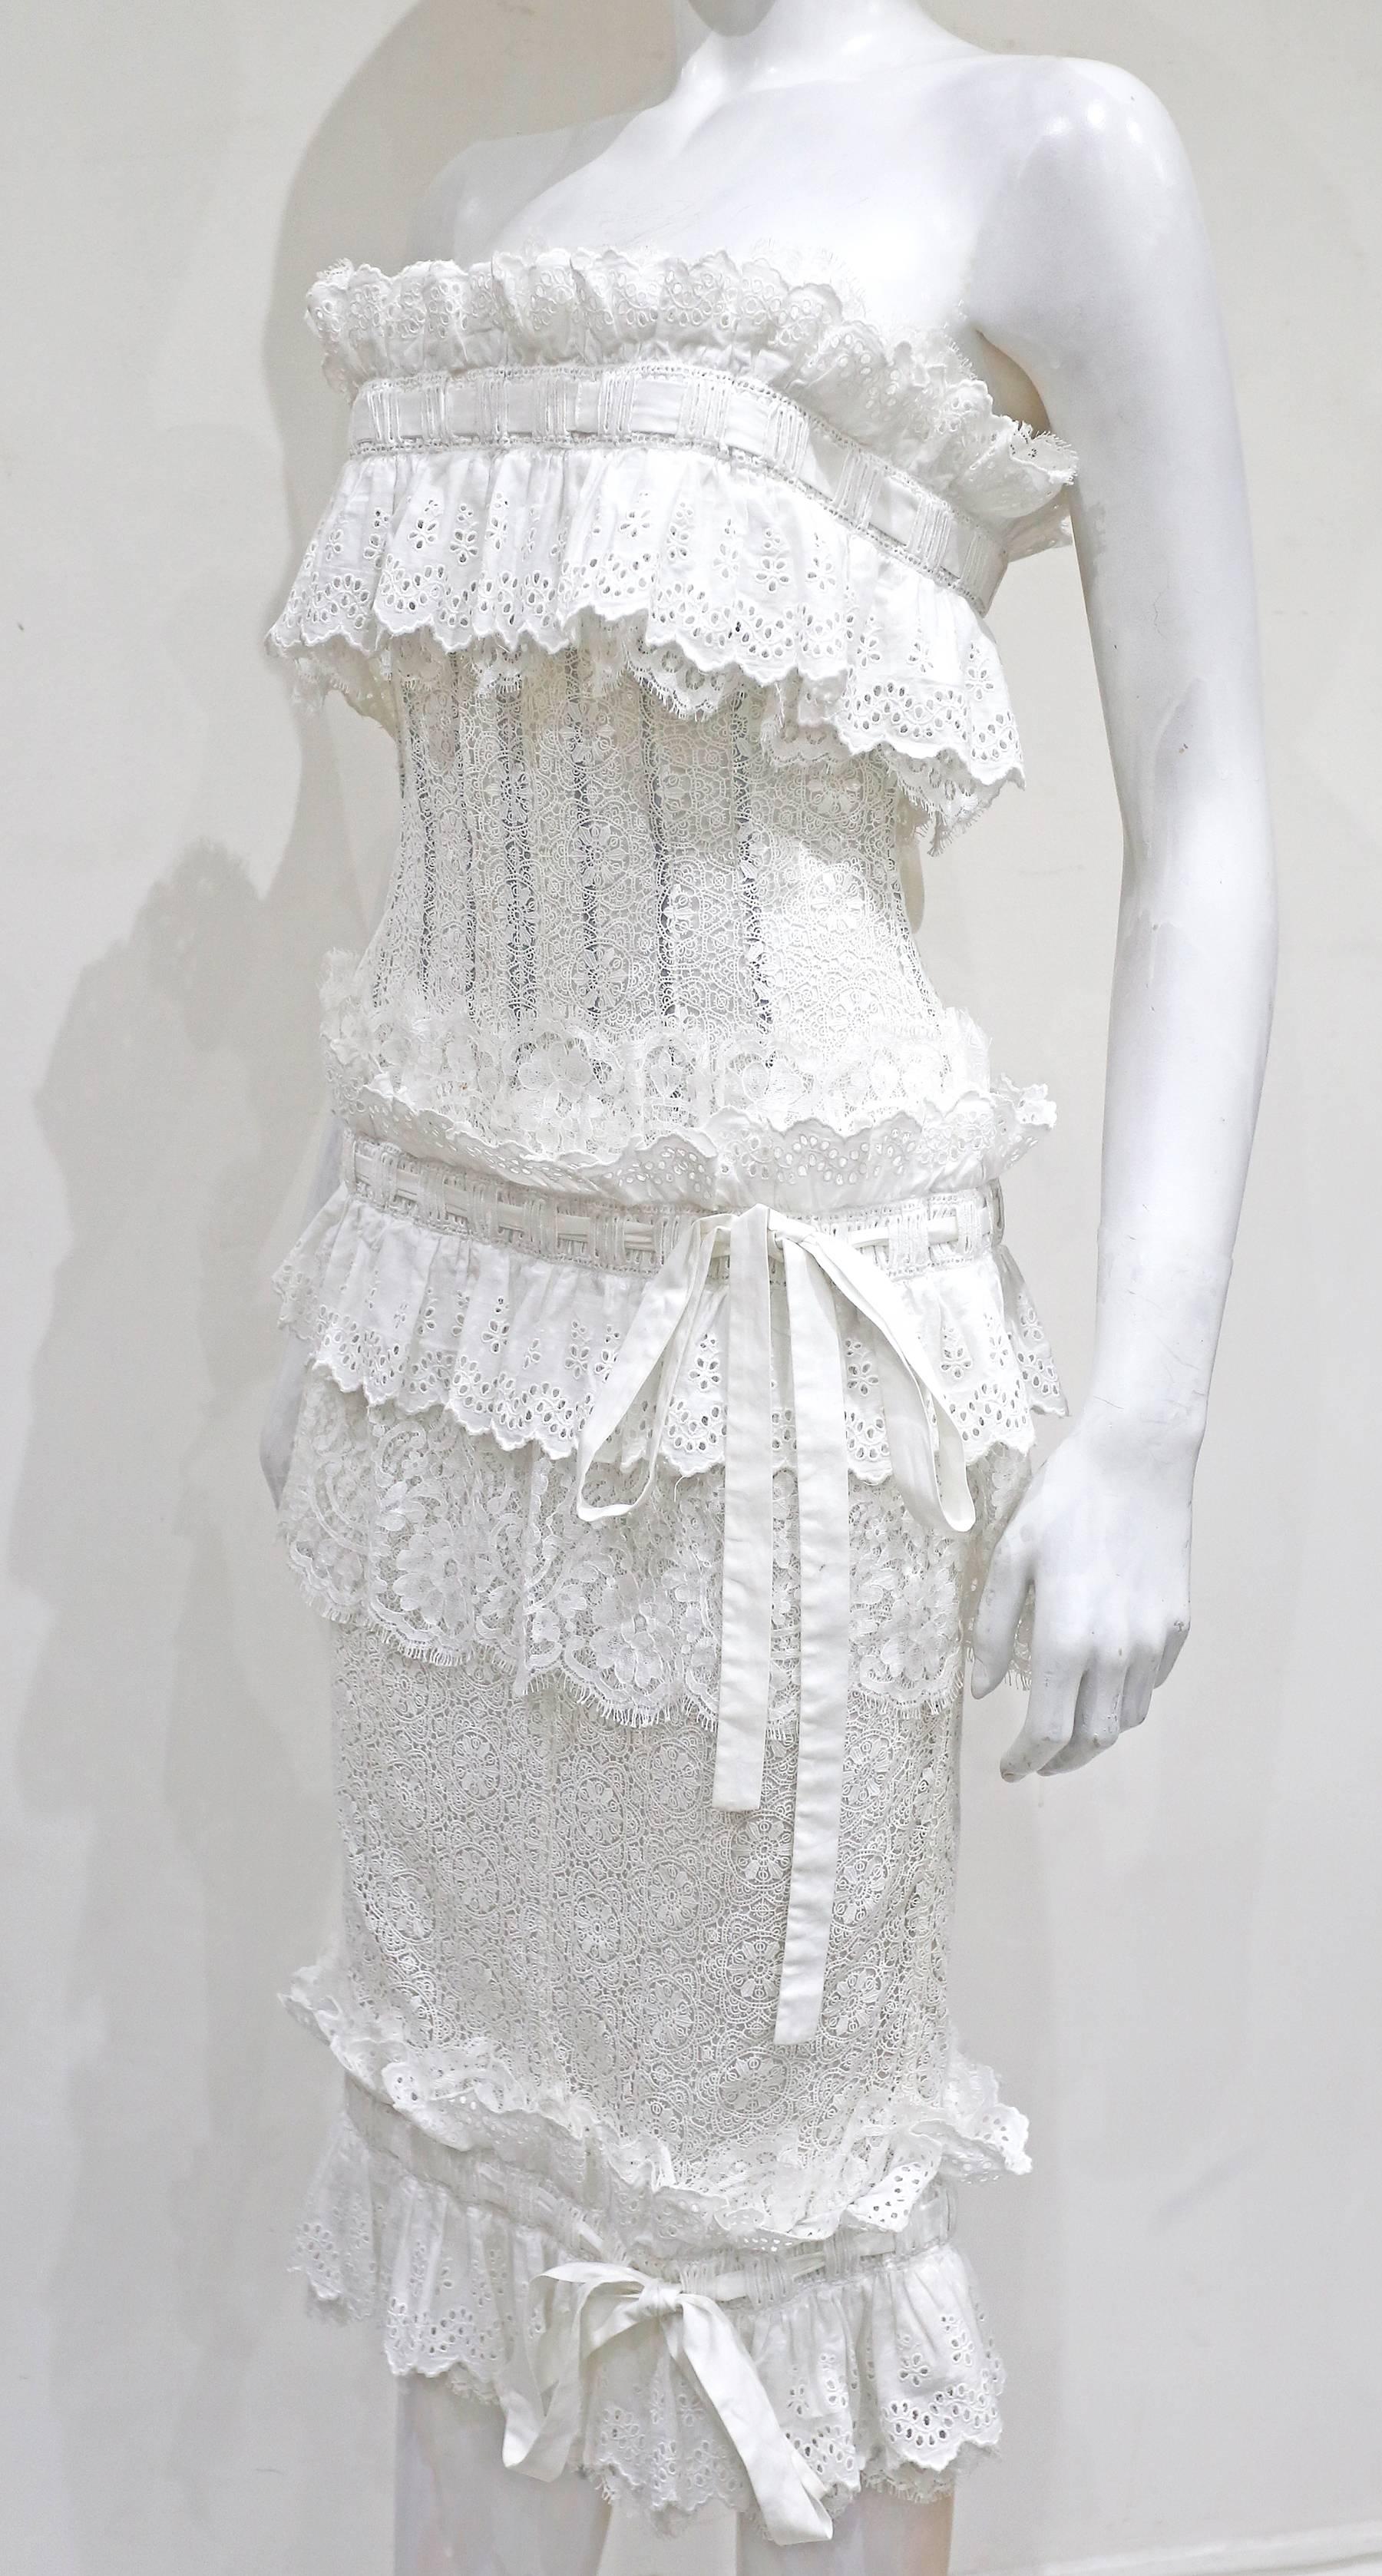 Dolce & Gabbana corseted broderie anglaise lace ruffled strapless dress, c.1990s 1